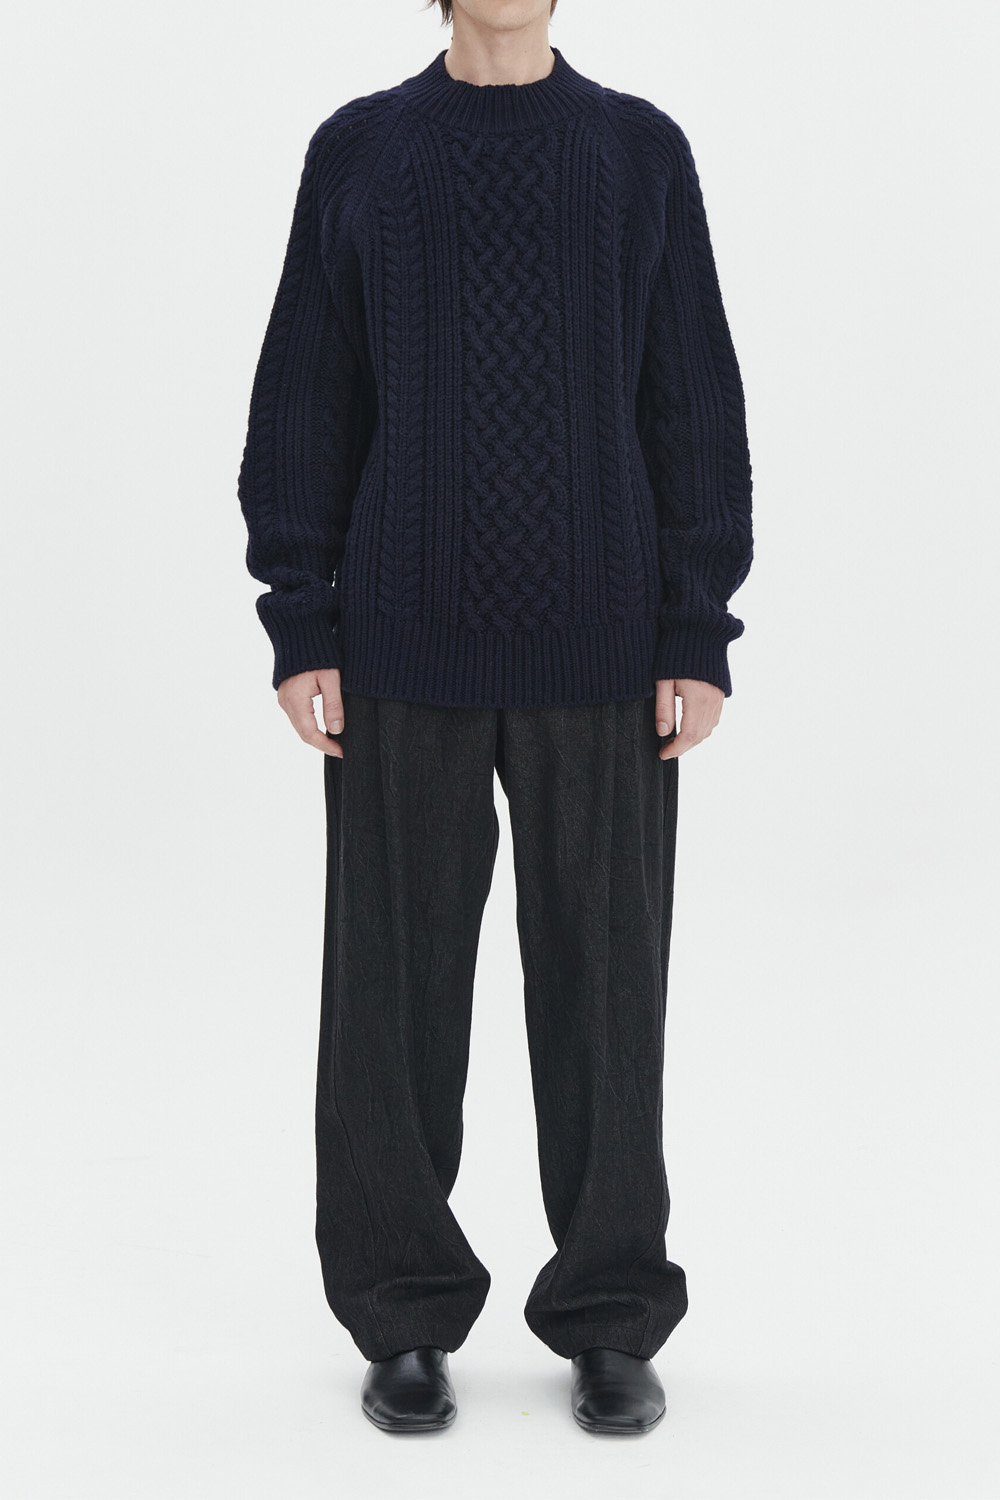 Fisherman Cable Knit - Navy